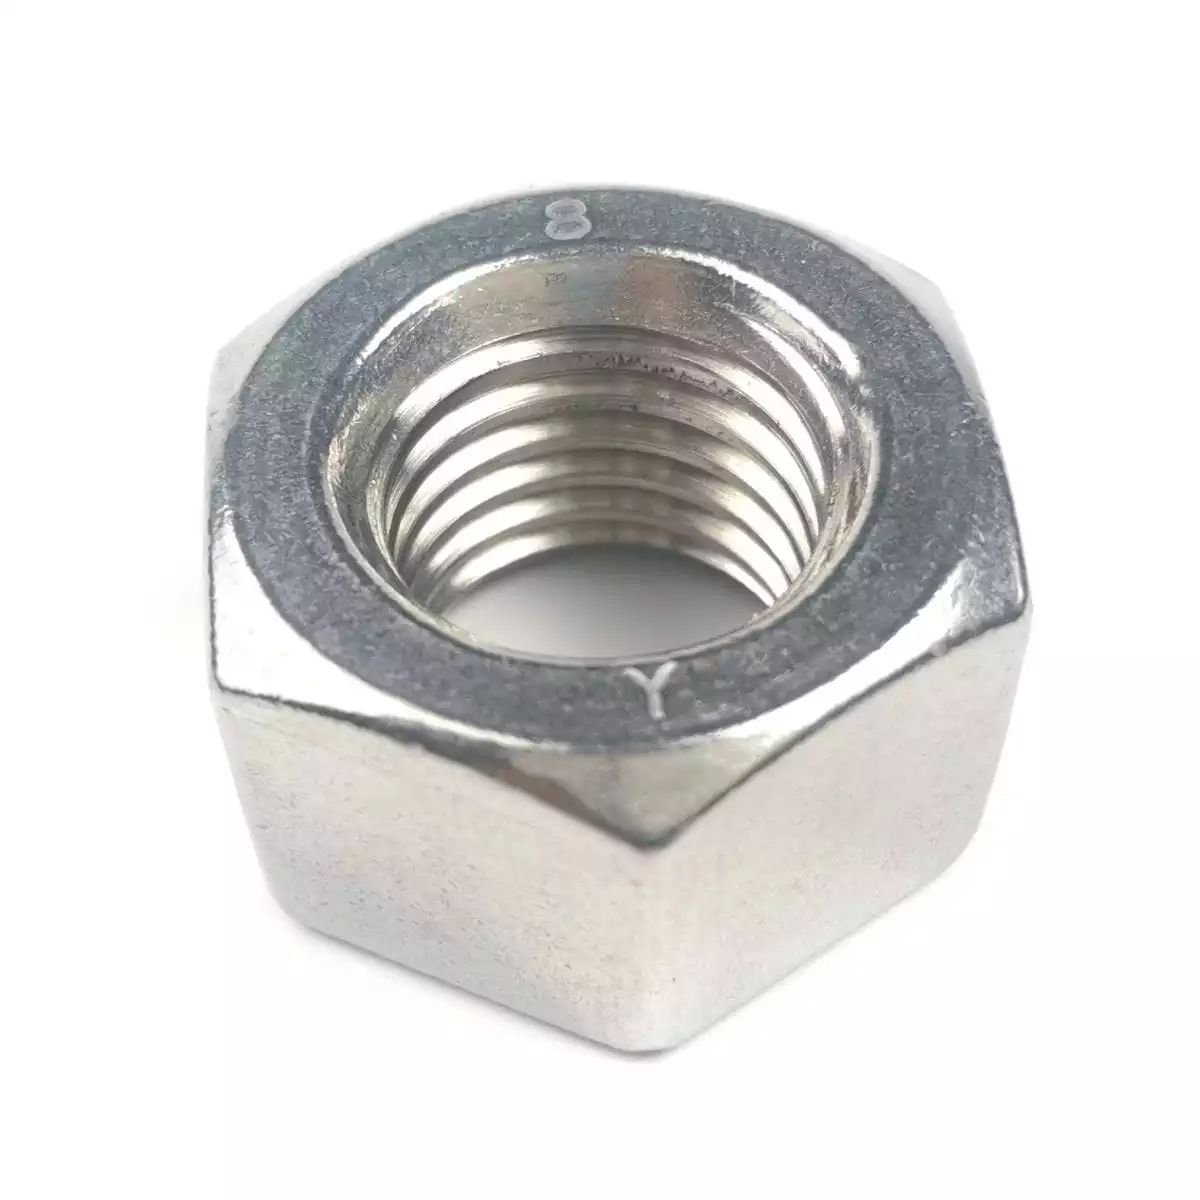 ANSI B18.2.2 Stainless Nut, Heavy Hex Type, 11 UNC Class 2B